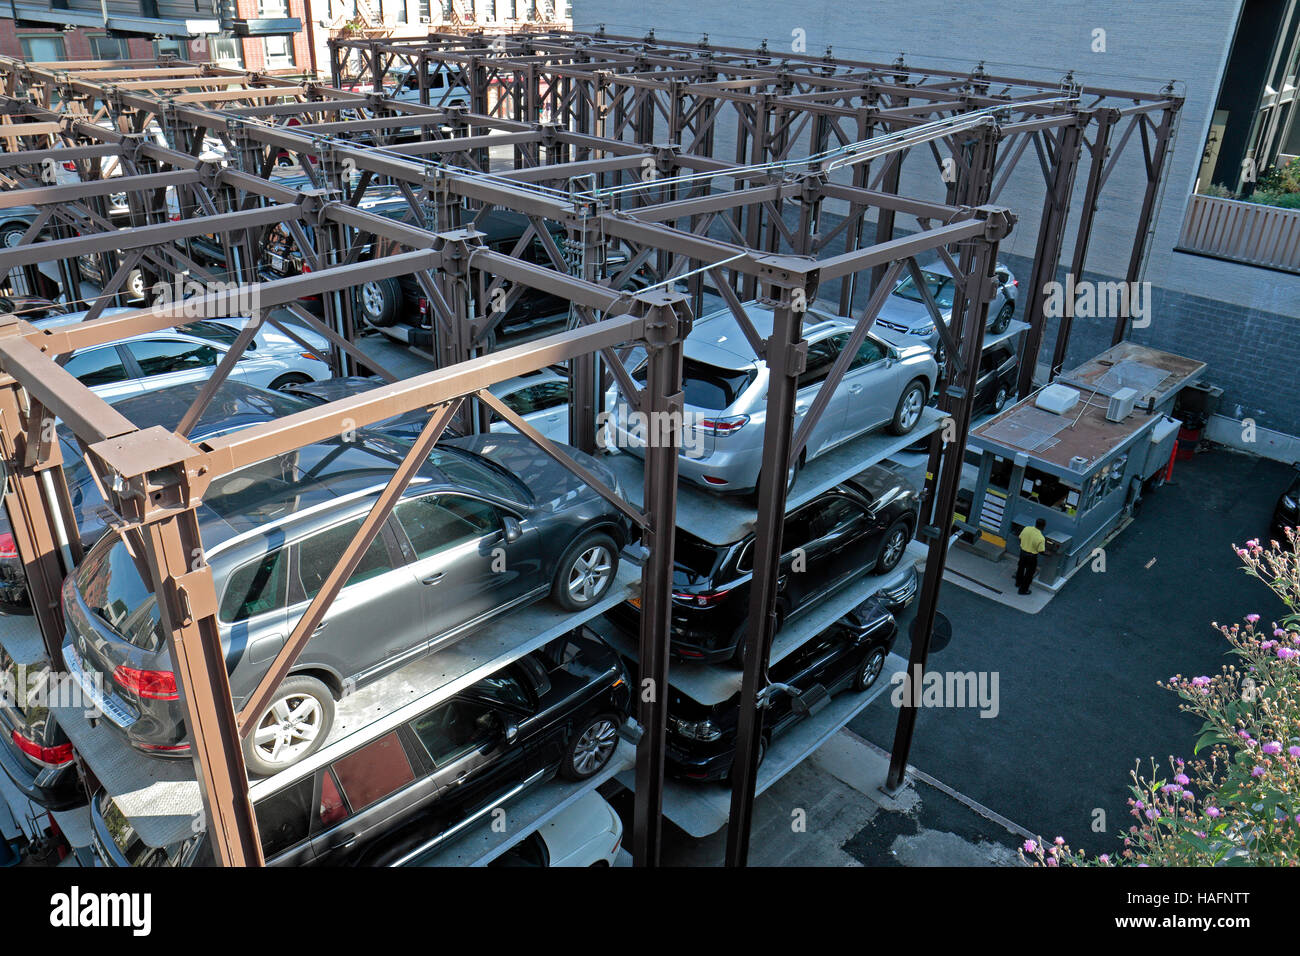 A multi level, stacked car parking system (called Edison ParkFast) in the Chelsea area of New York City, United States. Stock Photo